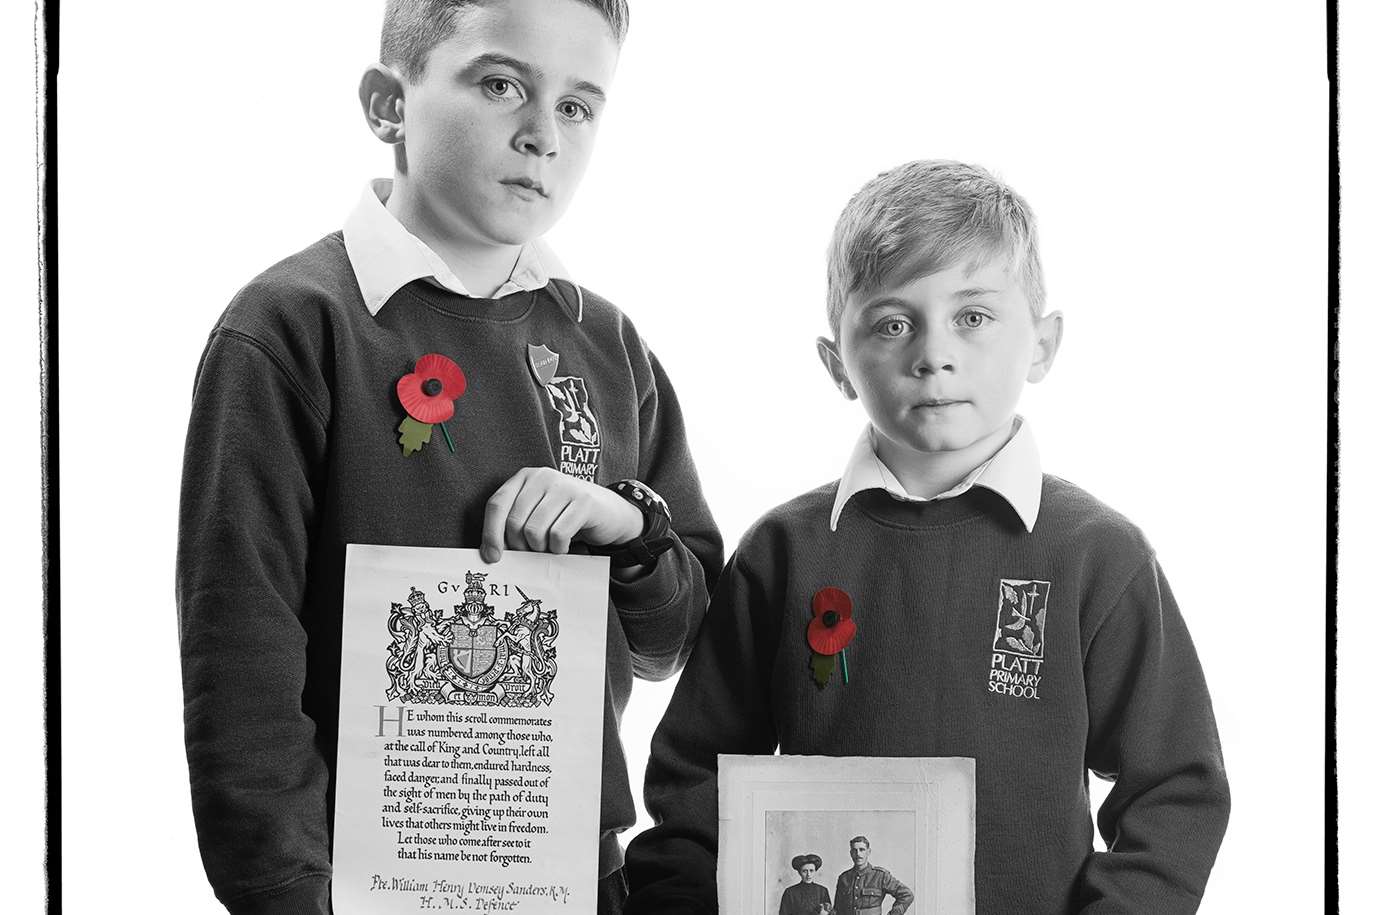 James & Thomas, Great Great Grandsons of William Sanders, Killed in Action 31 May 1916